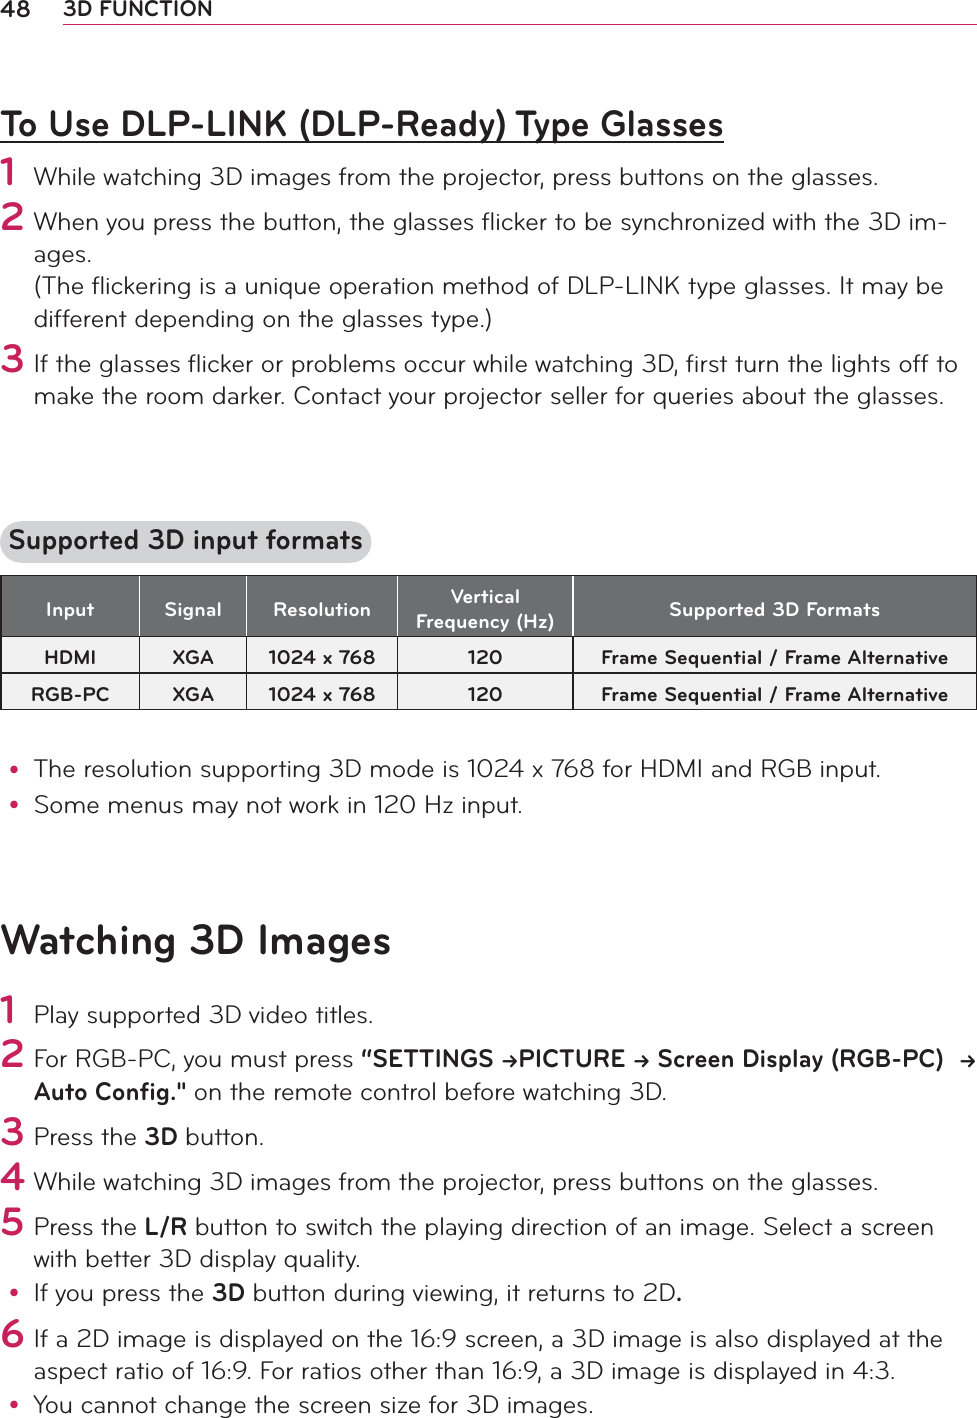 48 3D FUNCTIONTo Use DLP-LINK (DLP-Ready) Type Glasses1 While watching 3D images from the projector, press buttons on the glasses.2  When you press the button, the glasses ﬂicker to be synchronized with the 3D im-ages. (The ﬂickering is a unique operation method of DLP-LINK type glasses. It may be different depending on the glasses type.) 3 If the glasses ﬂicker or problems occur while watching 3D, ﬁrst turn the lights off to make the room darker. Contact your projector seller for queries about the glasses.  Supported 3D input formatsInput Signal Resolution Vertical Frequency (Hz) Supported 3D FormatsHDMI XGA 1024 x 768 120 Frame Sequential / Frame AlternativeRGB-PC XGA 1024 x 768 120 Frame Sequential / Frame Alternativey The resolution supporting 3D mode is 1024 x 768 for HDMI and RGB input.y Some menus may not work in 120 Hz input.Watching 3D Images1 Play supported 3D video titles. 2        For RGB-PC, you must press “SETTINGS PICTURE  Screen Display (RGB-PC)   Auto Config.&quot; on the remote control before watching 3D.    3 Press the 3D button.   4 While watching 3D images from the projector, press buttons on the glasses.5 Press the L/R button to switch the playing direction of an image. Select a screen with better 3D display quality.y If you press the 3D button during viewing, it returns to 2D.   6 If a 2D image is displayed on the 16:9 screen, a 3D image is also displayed at the aspect ratio of 16:9. For ratios other than 16:9, a 3D image is displayed in 4:3.y You cannot change the screen size for 3D images.